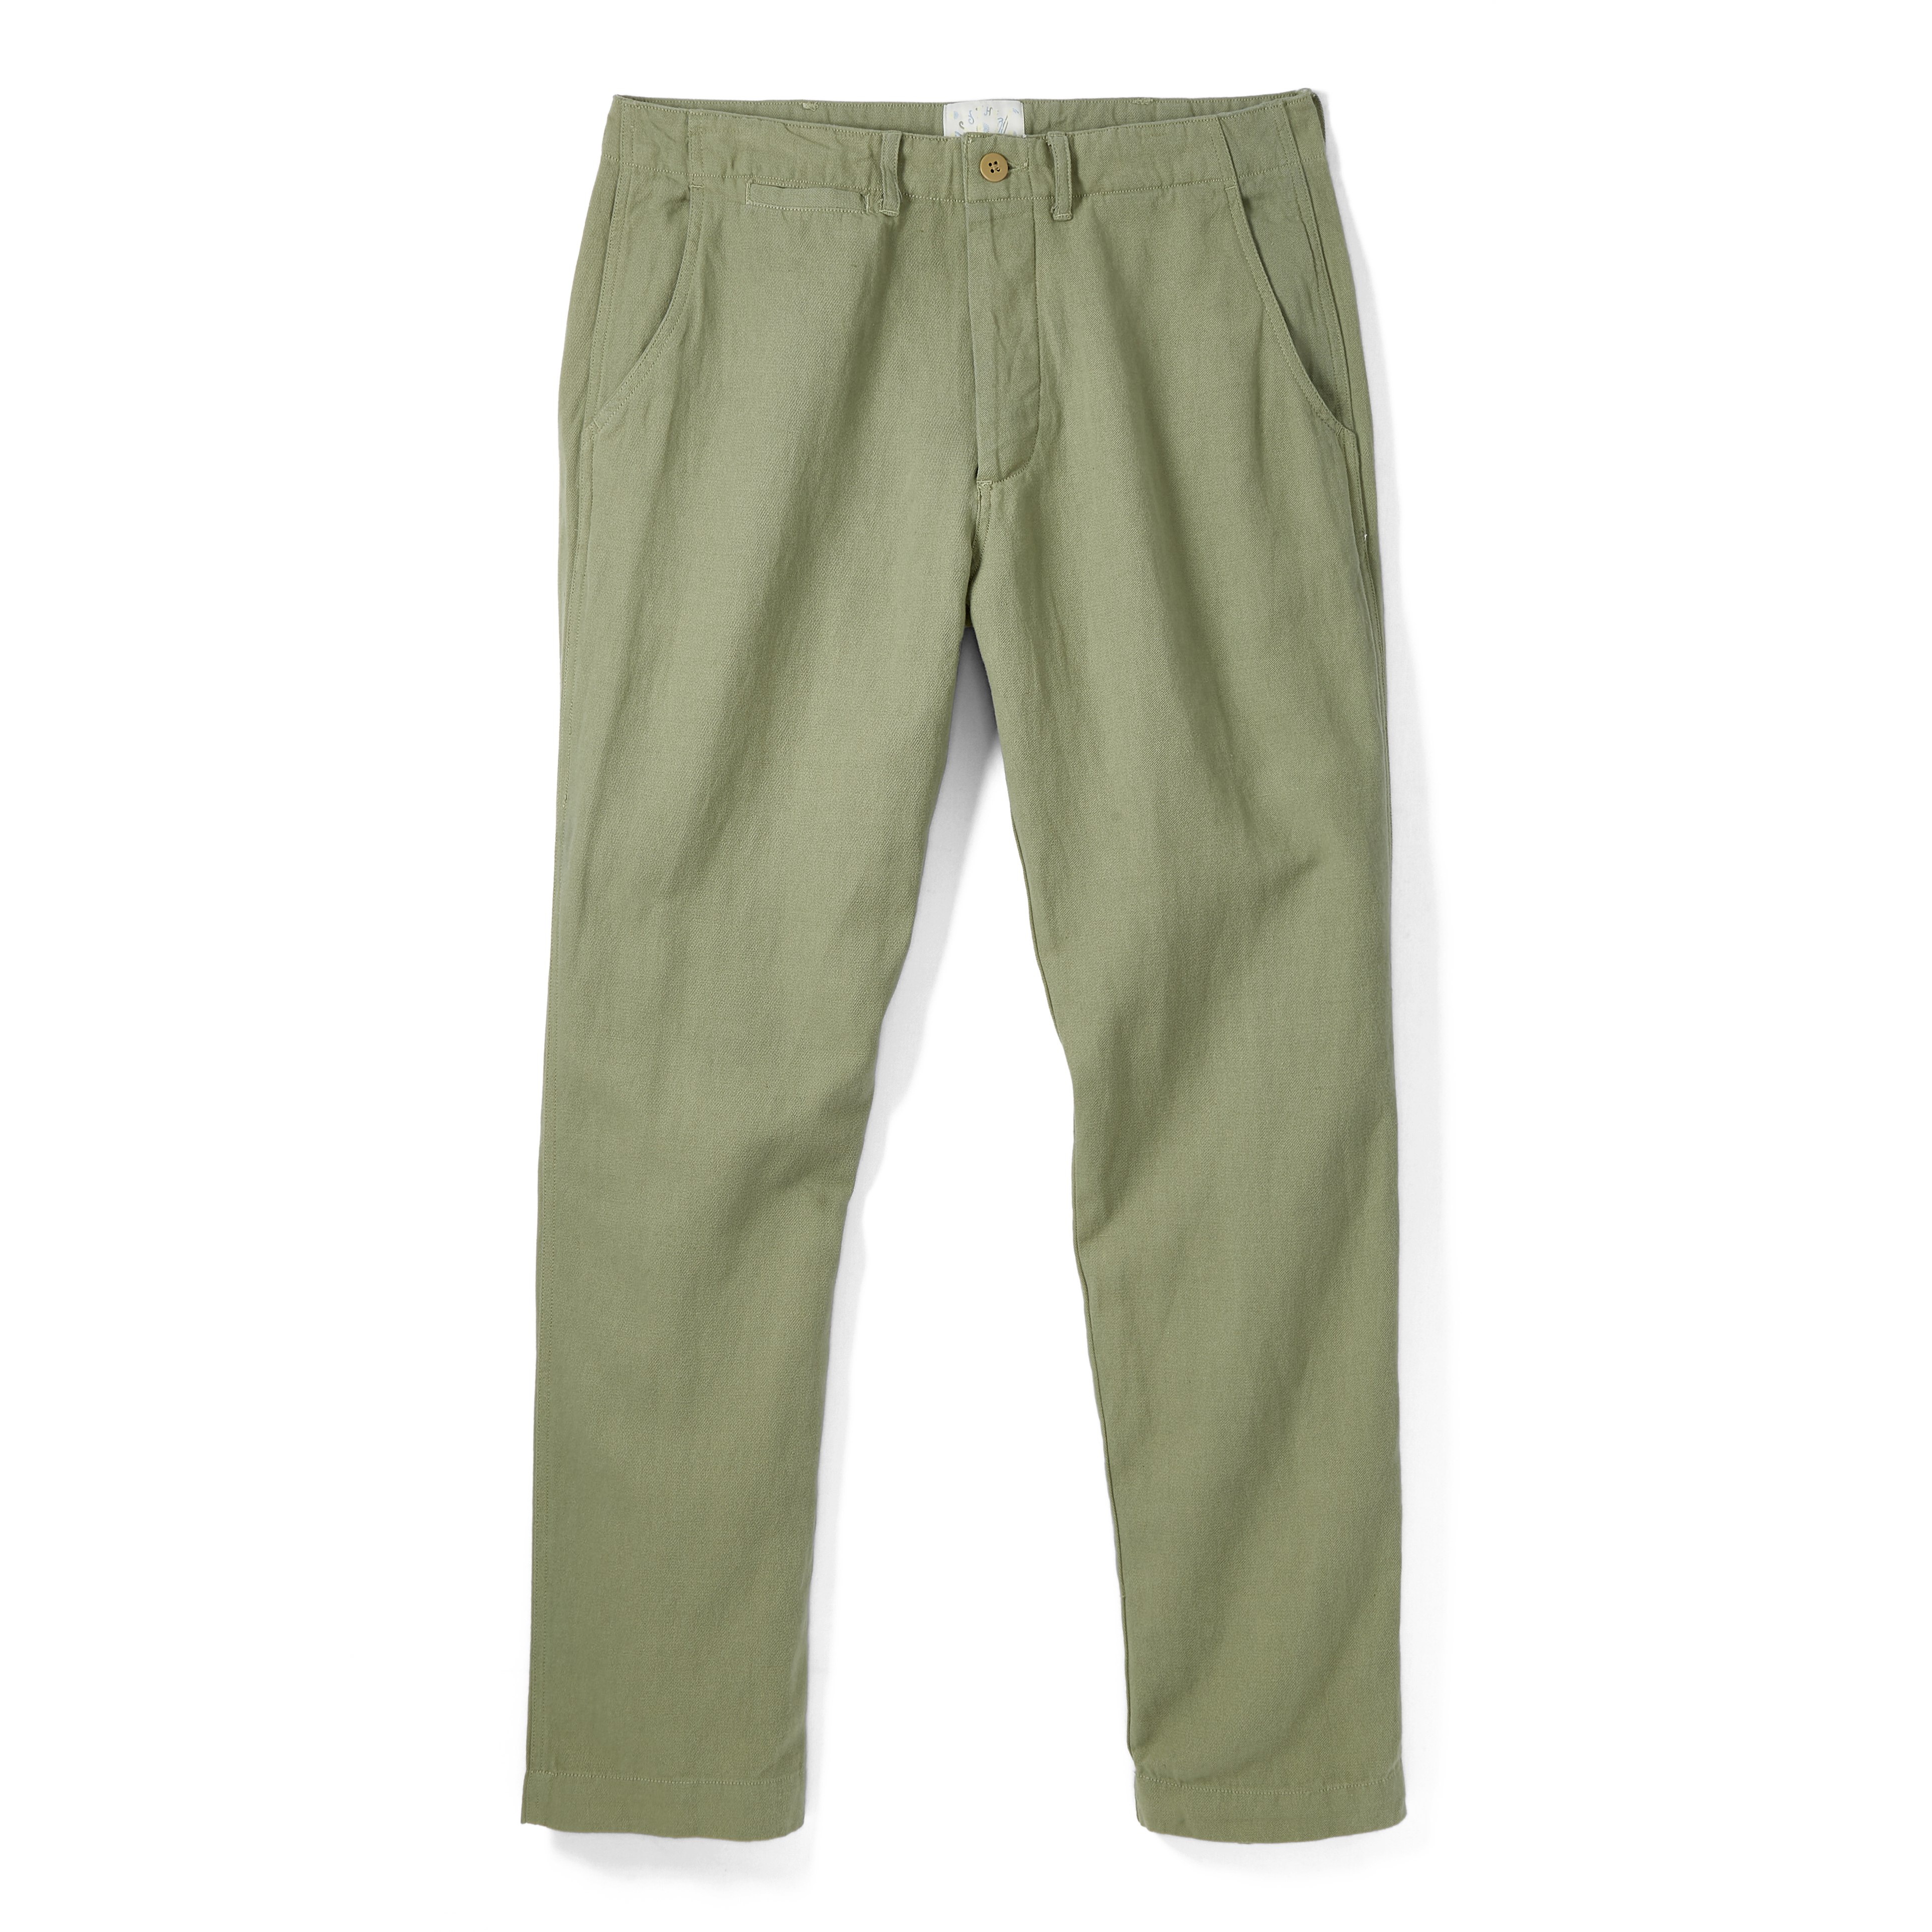 Wythe New York Flat Front Cotton Linen Twill Chino - Faded Olive 